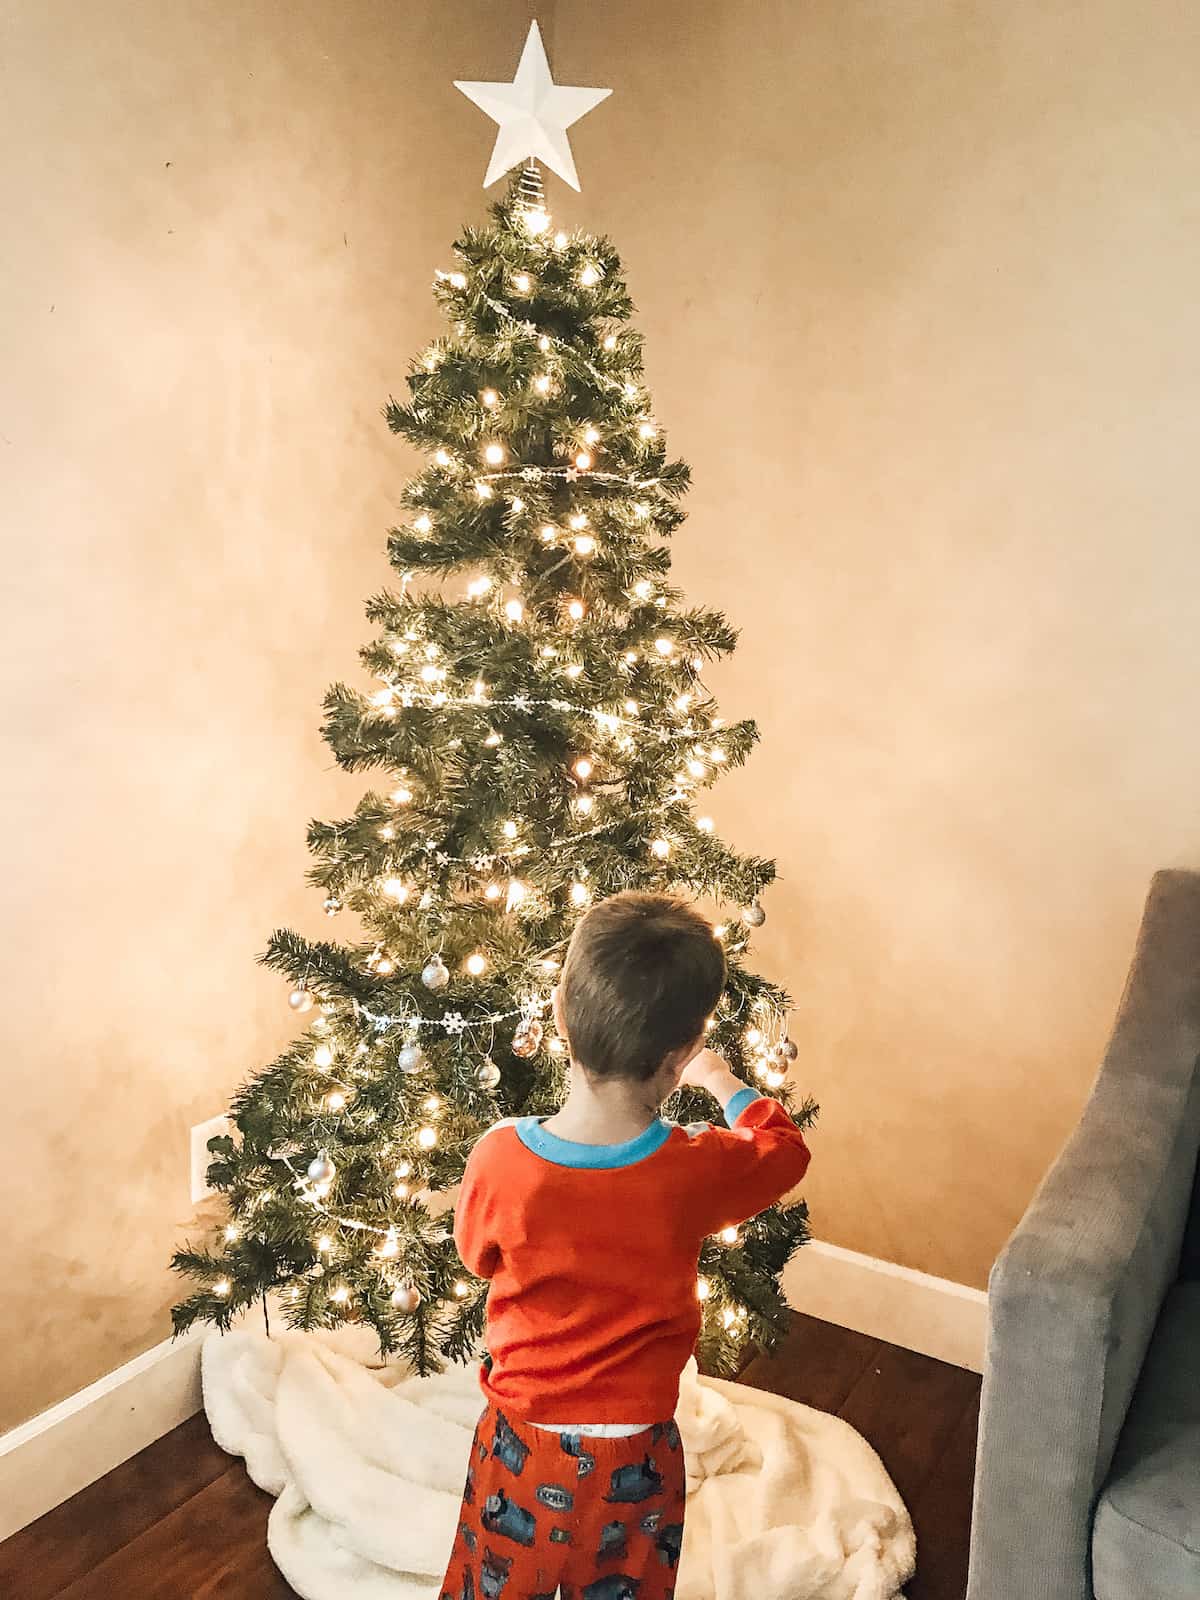 little boy standing in front of the decorated Christmas tree.